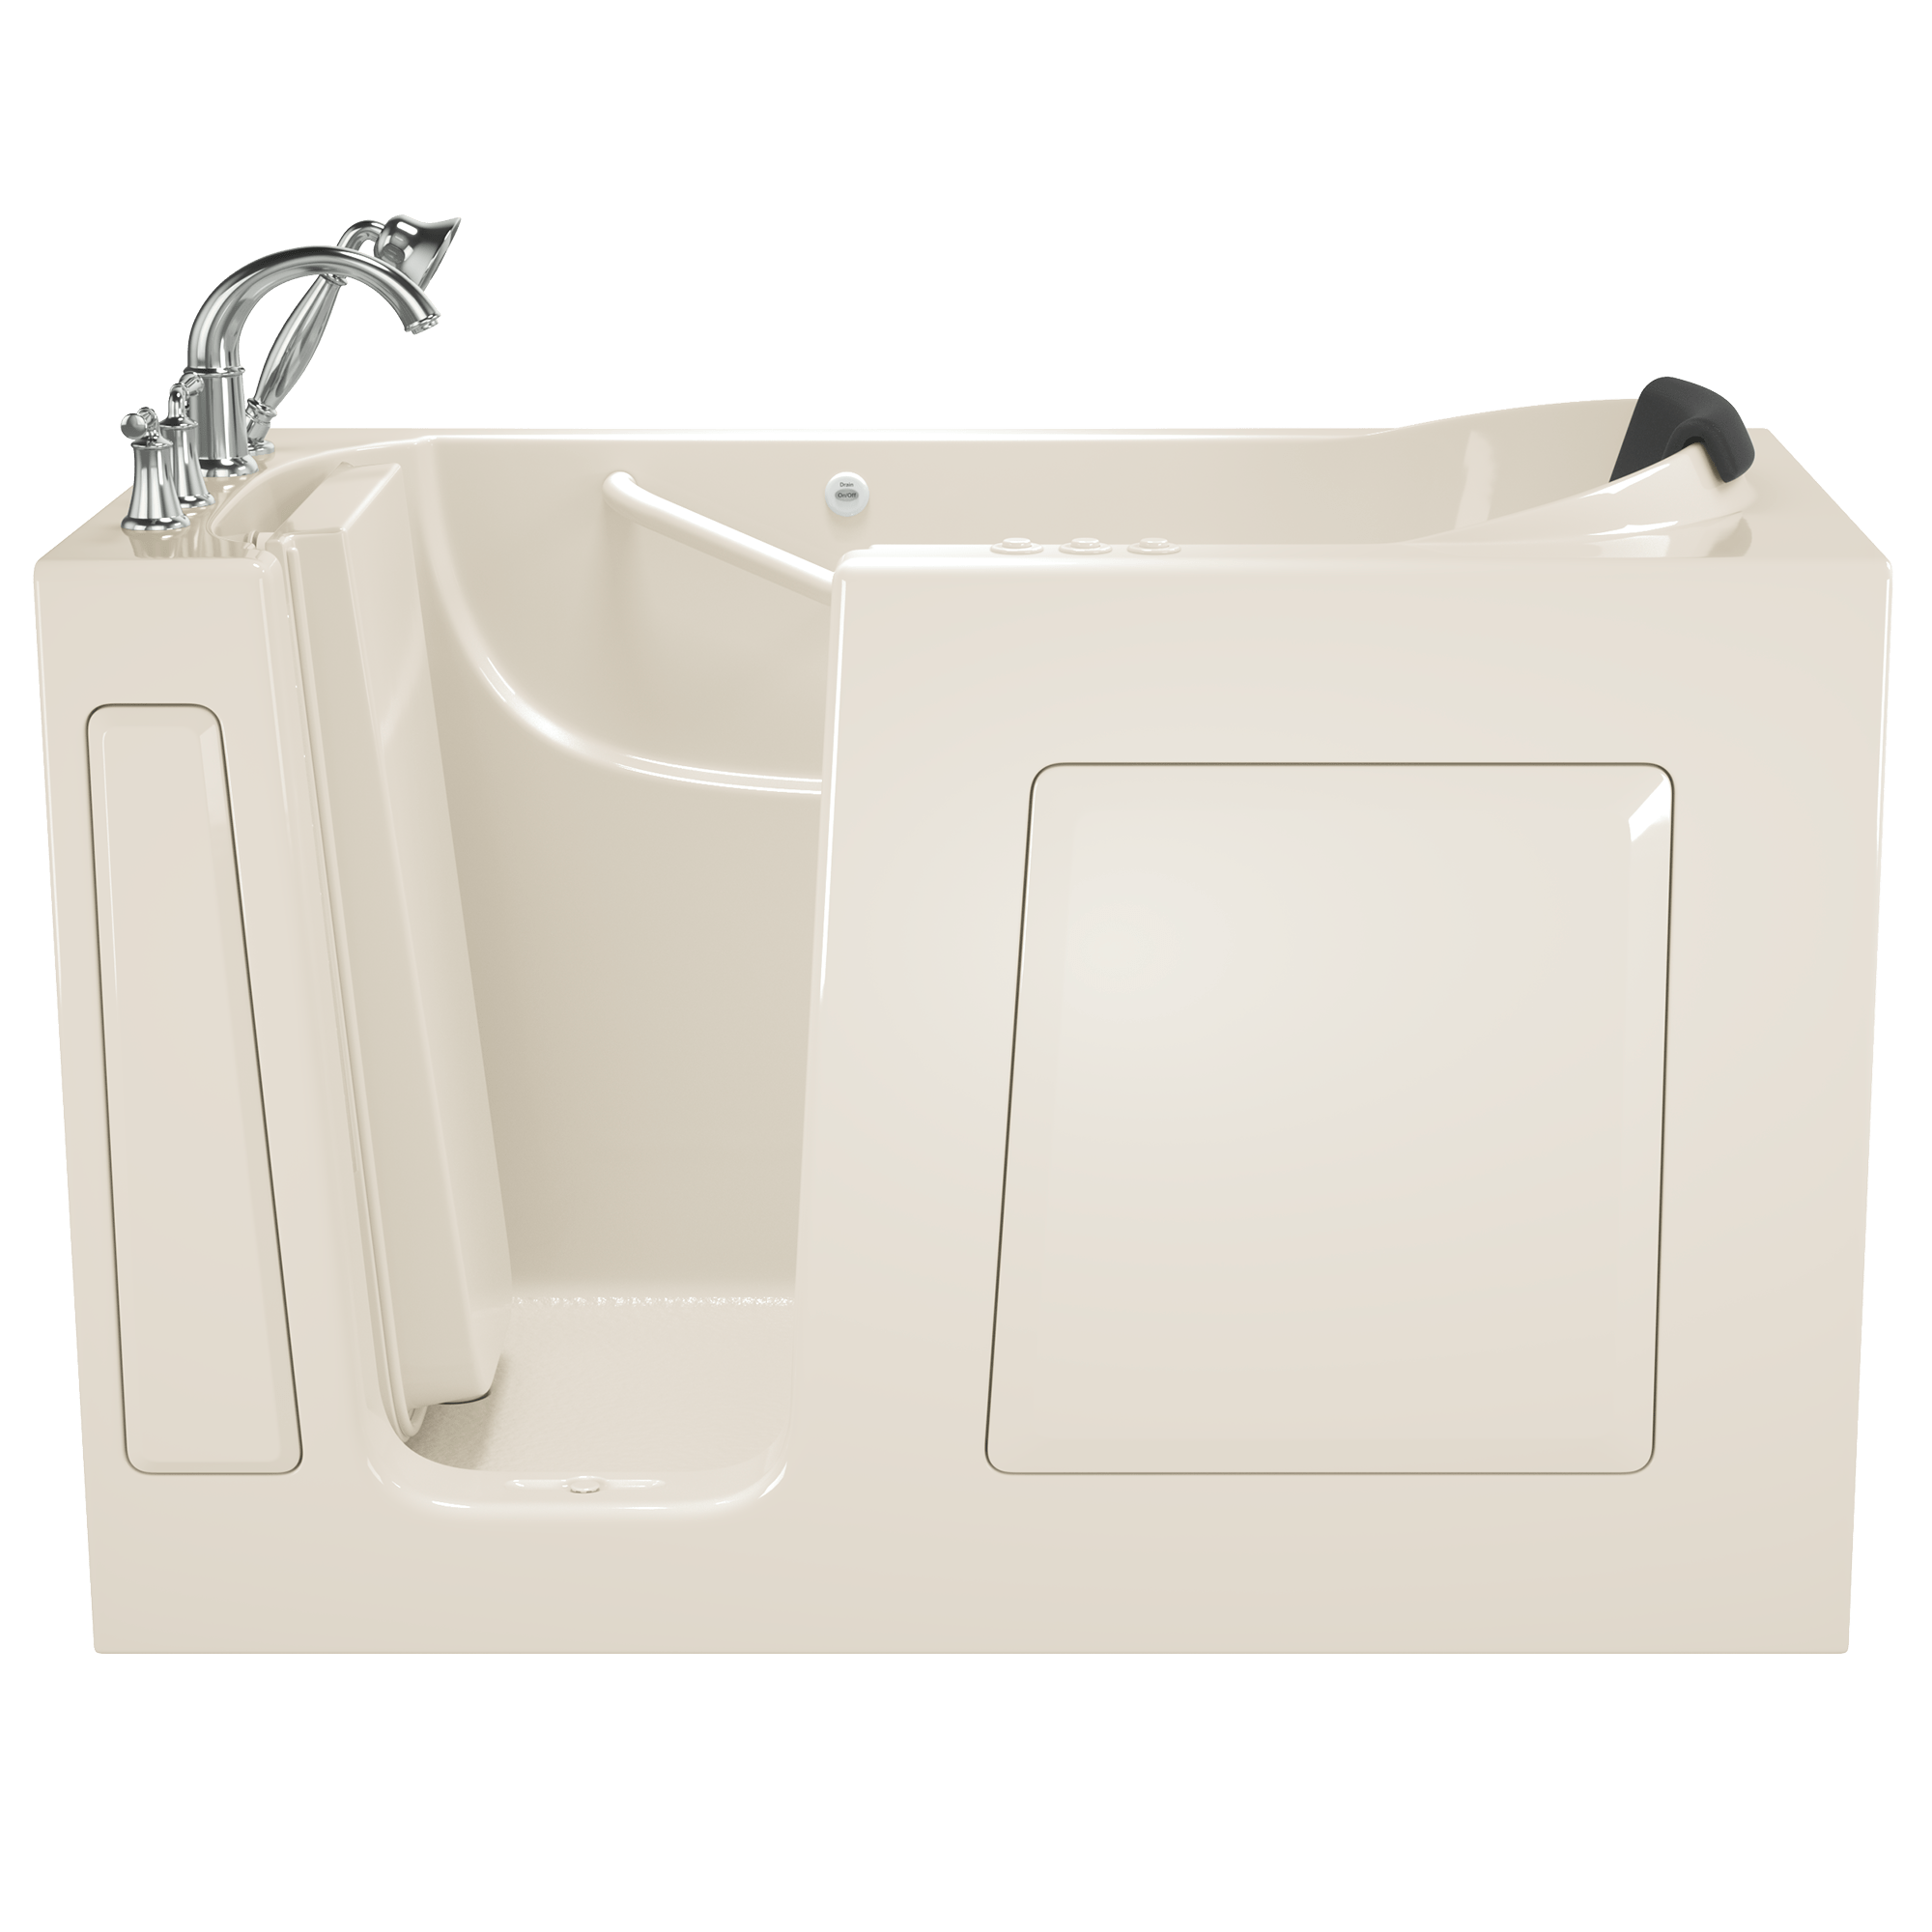 Gelcoat Premium Series 60x30 Inch Walk-In Bathtub with Dual Air Massage and Jet Massage System - Left Hand Door and Drain